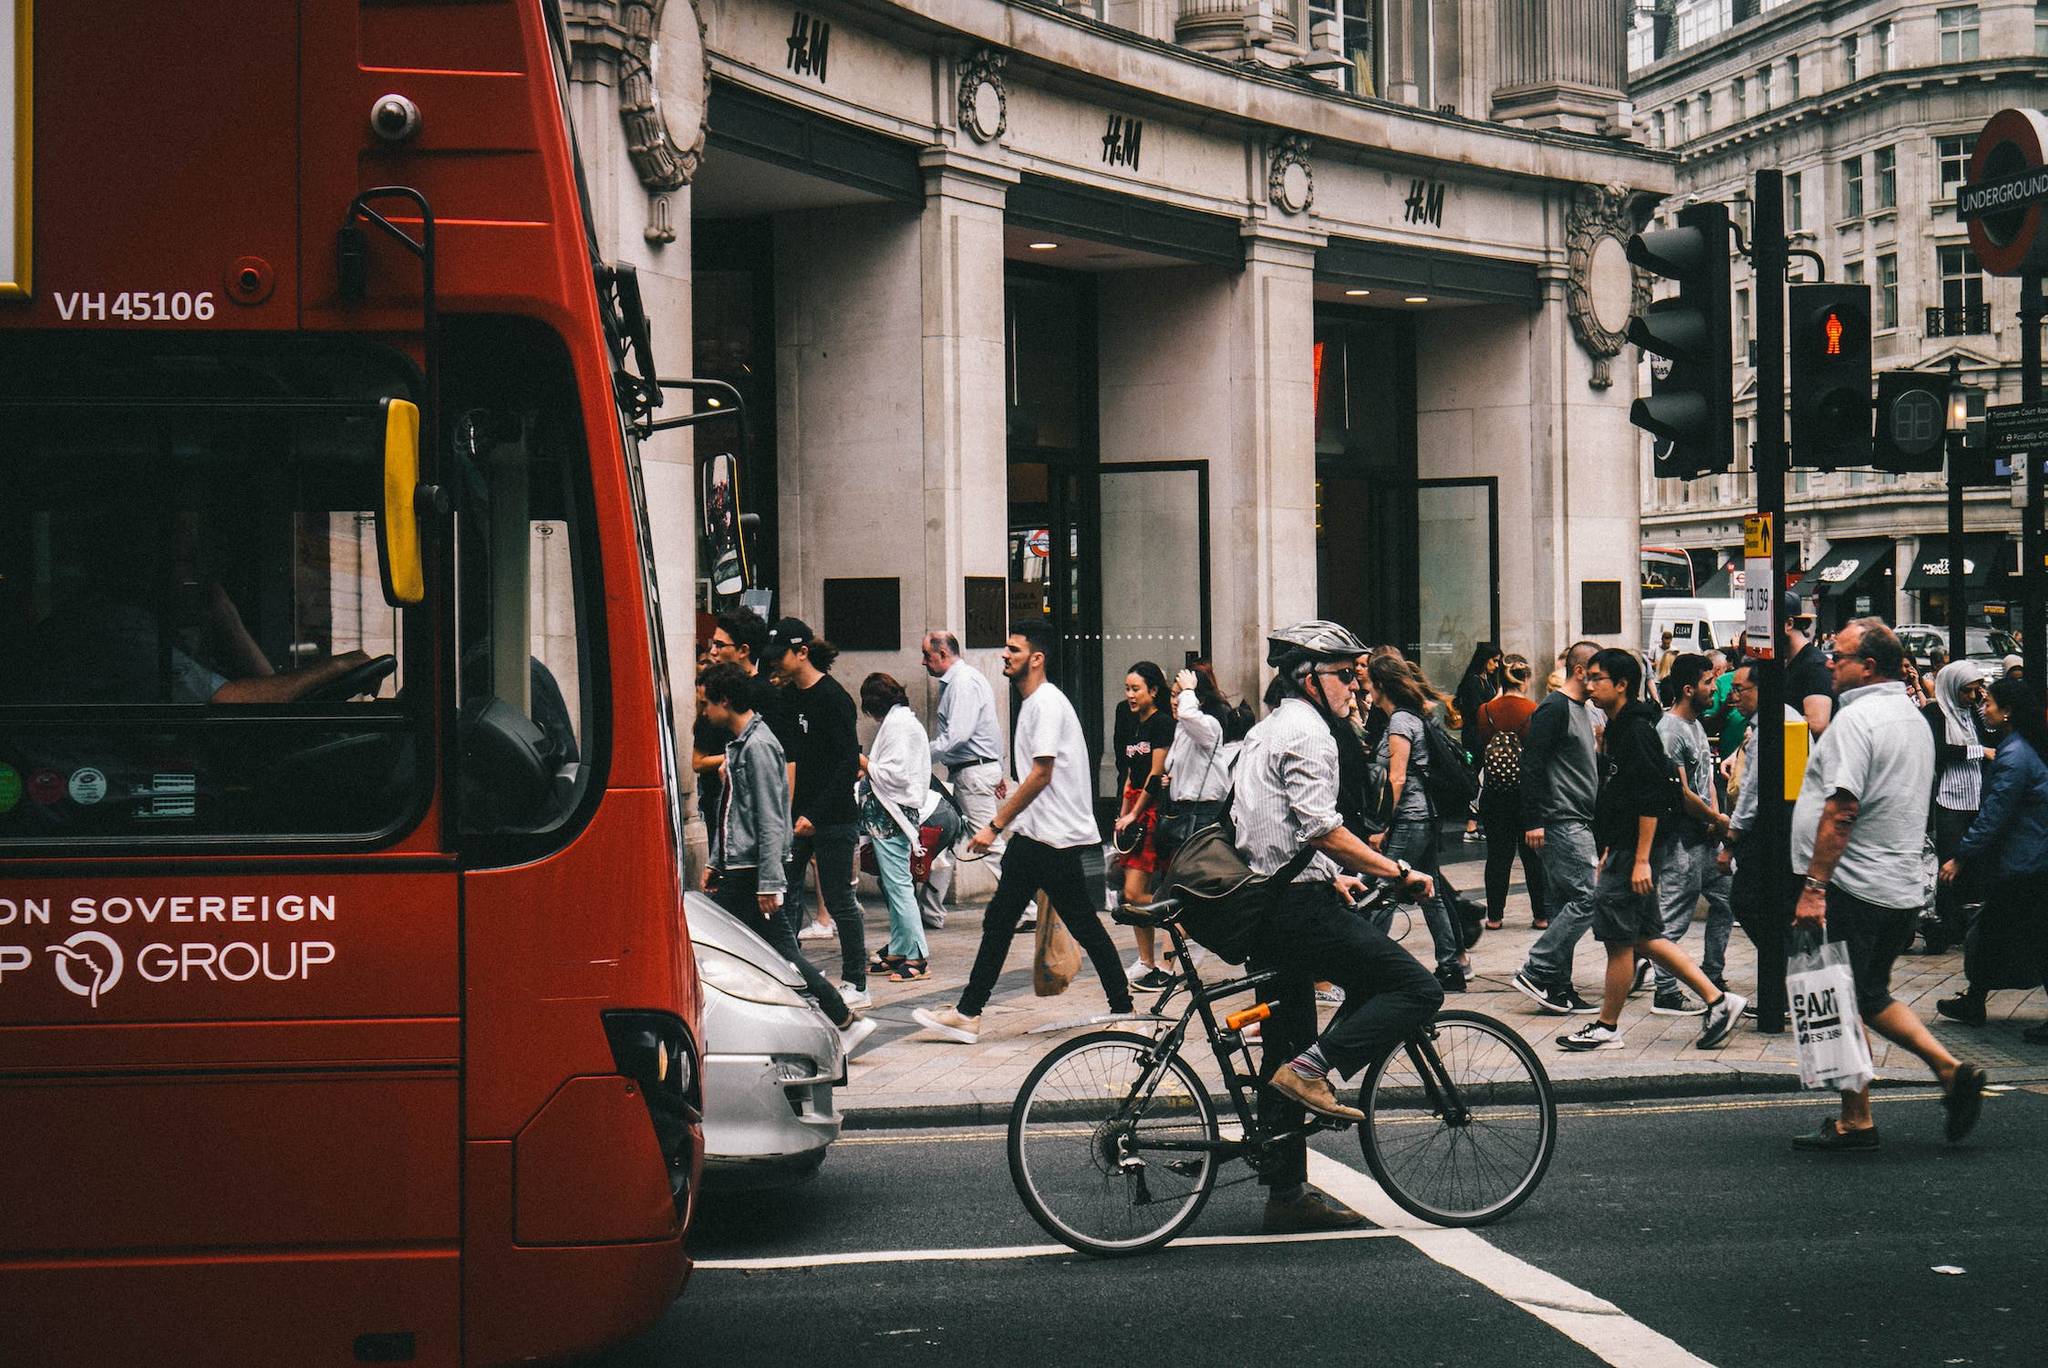 What’s driving Britons towards shared mobility services?